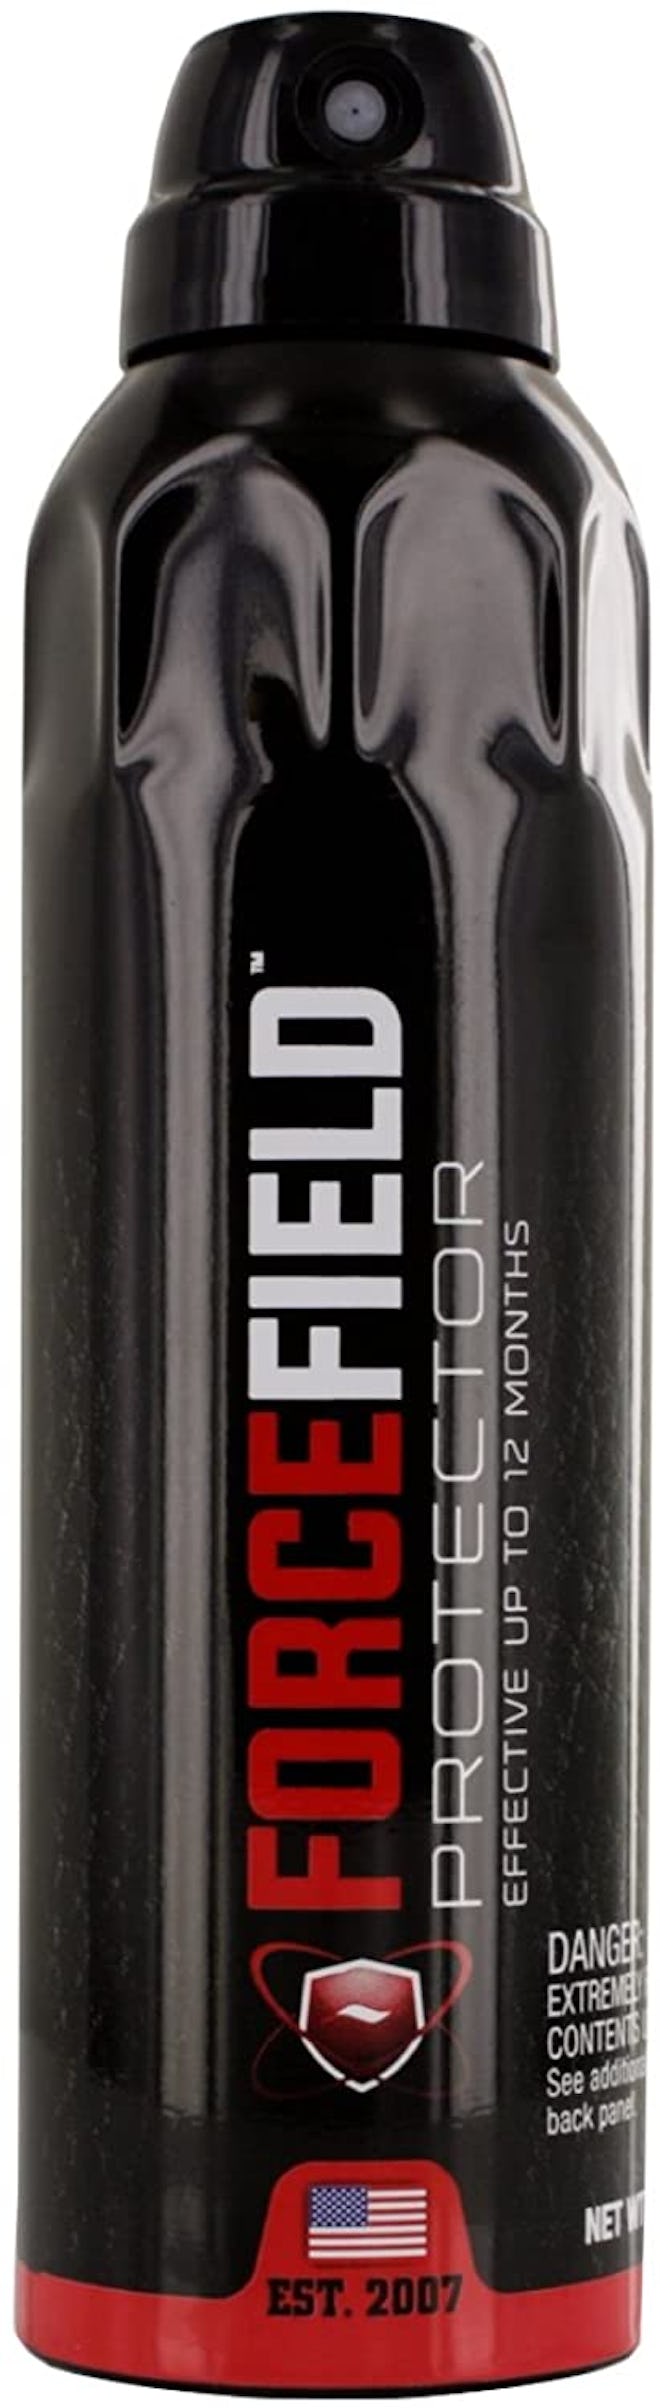 ForceField Waterproof Stain-Resistant Protectant Spray